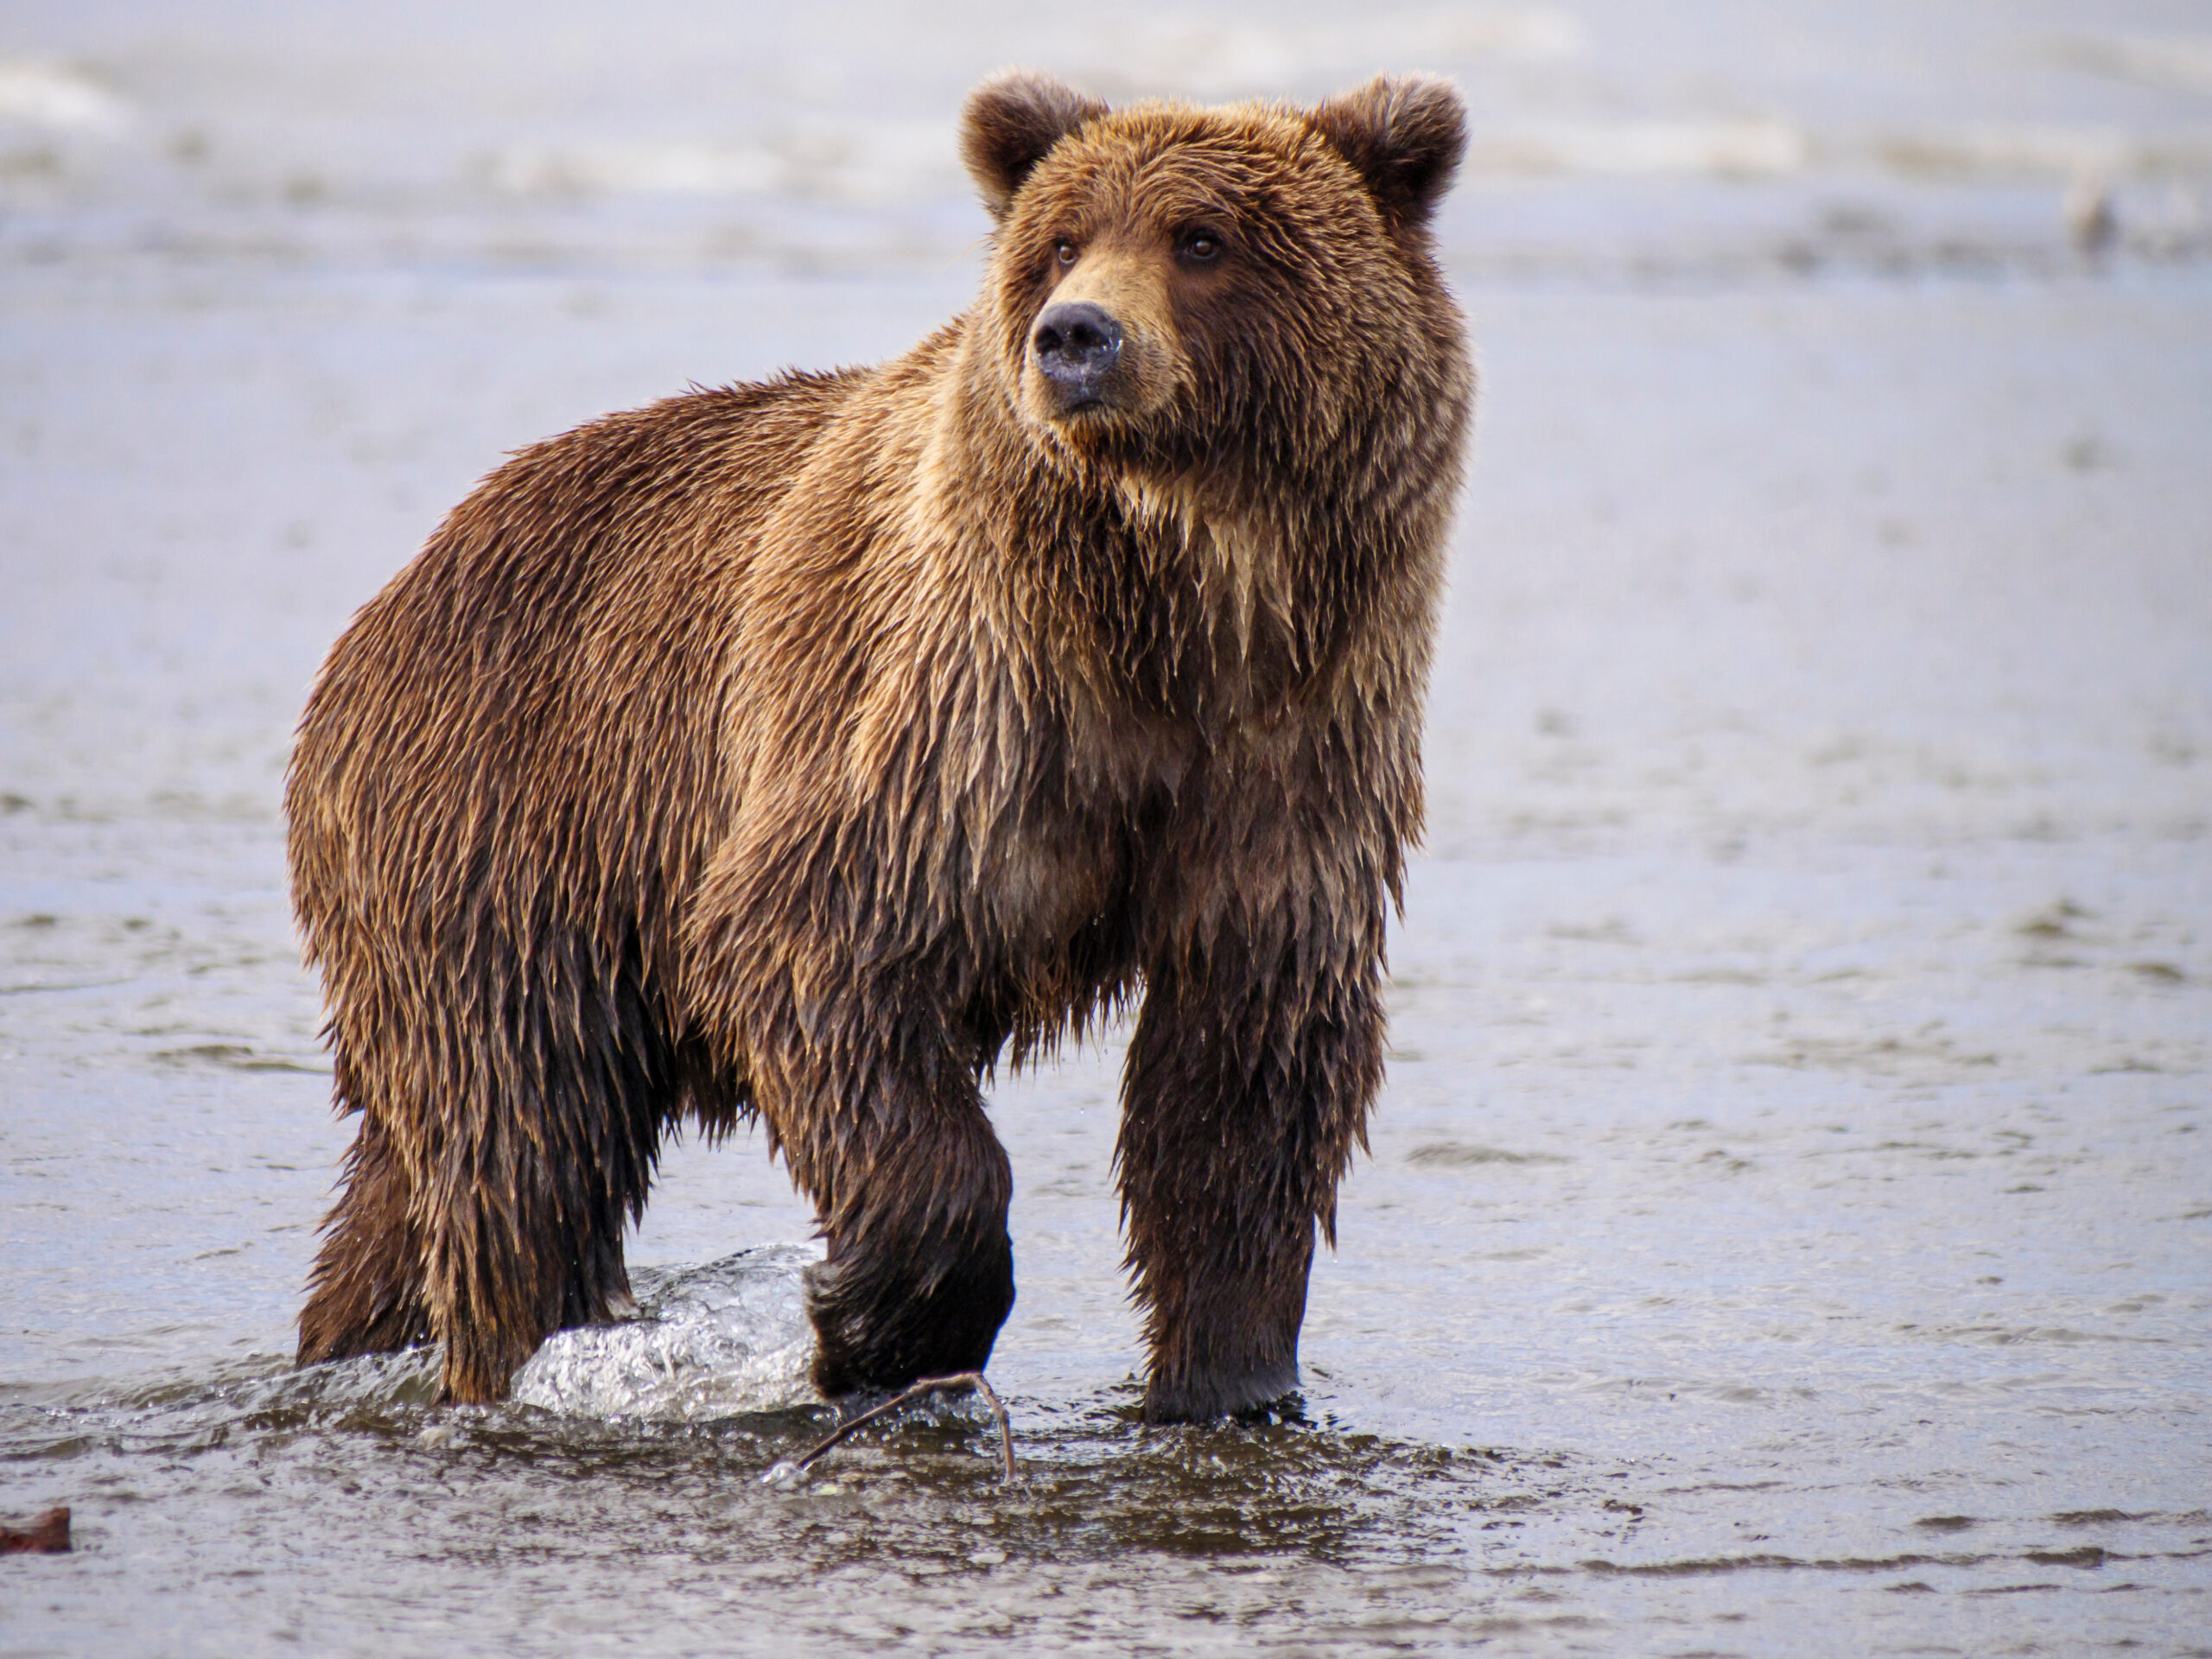 Conservation Groups Welcome the Return of the Grizzly to the North Cascades